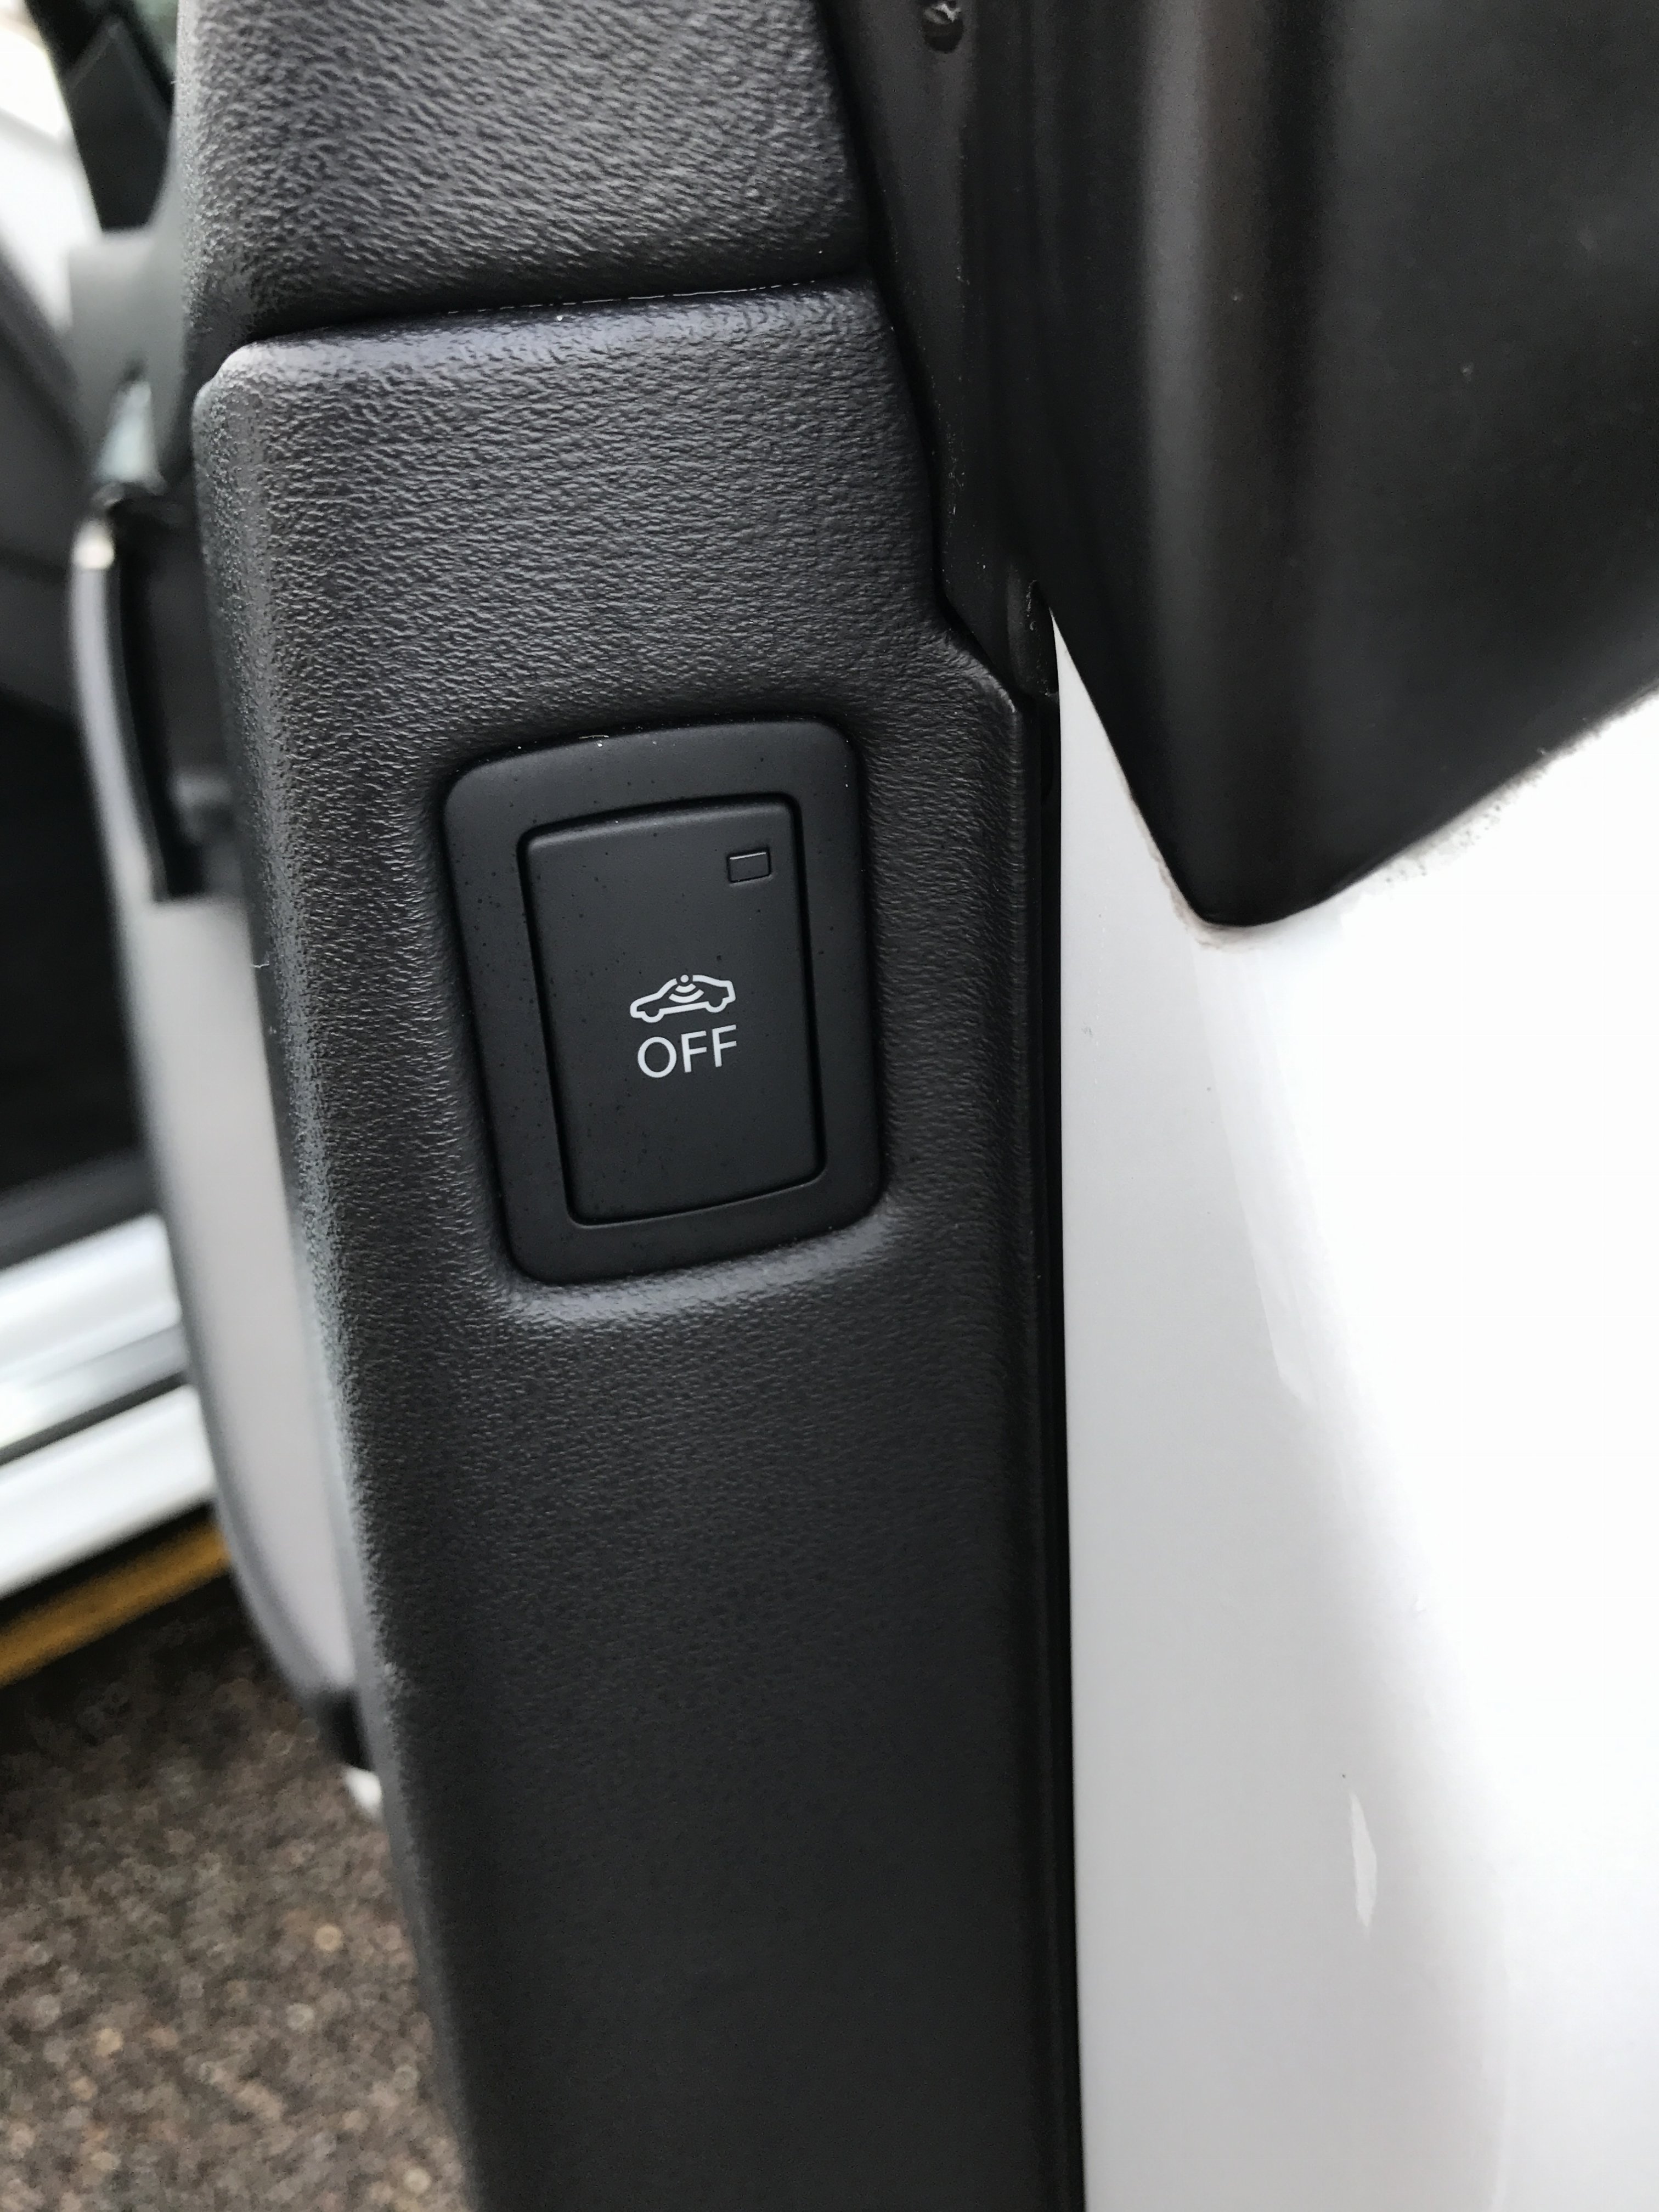 what is this button? | Audi-Sport.net